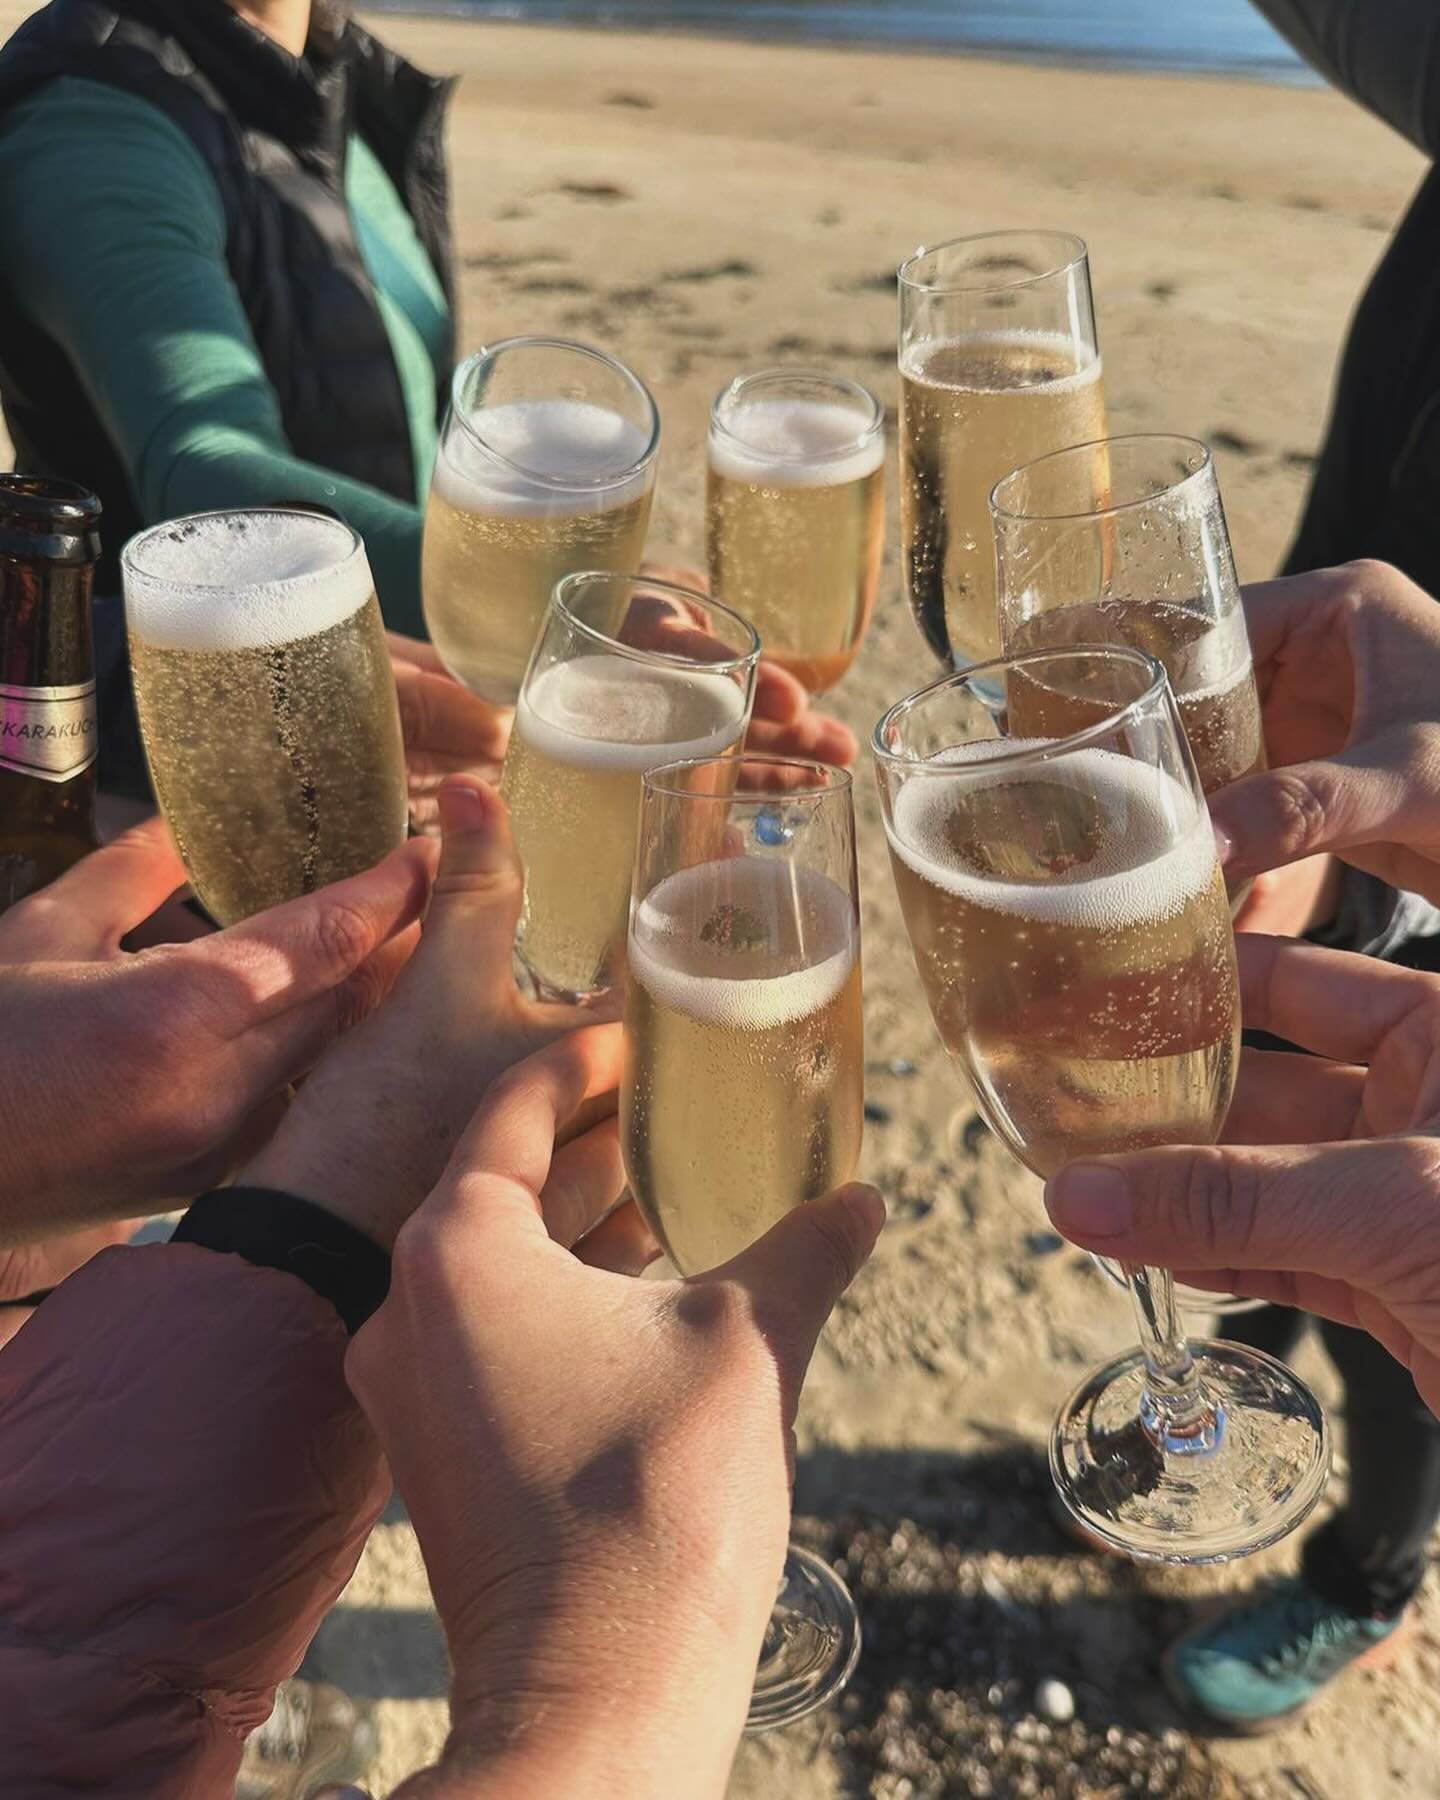 Ending this fine day with bubbles and cheese on the beach. Sand between our toes, smiles and laughter and gratitude for the big blue sky and the beautiful dip in Wine Glass Bay! Thank you Freycinet for another stunning day. @freycinetlodge #girlswhoh